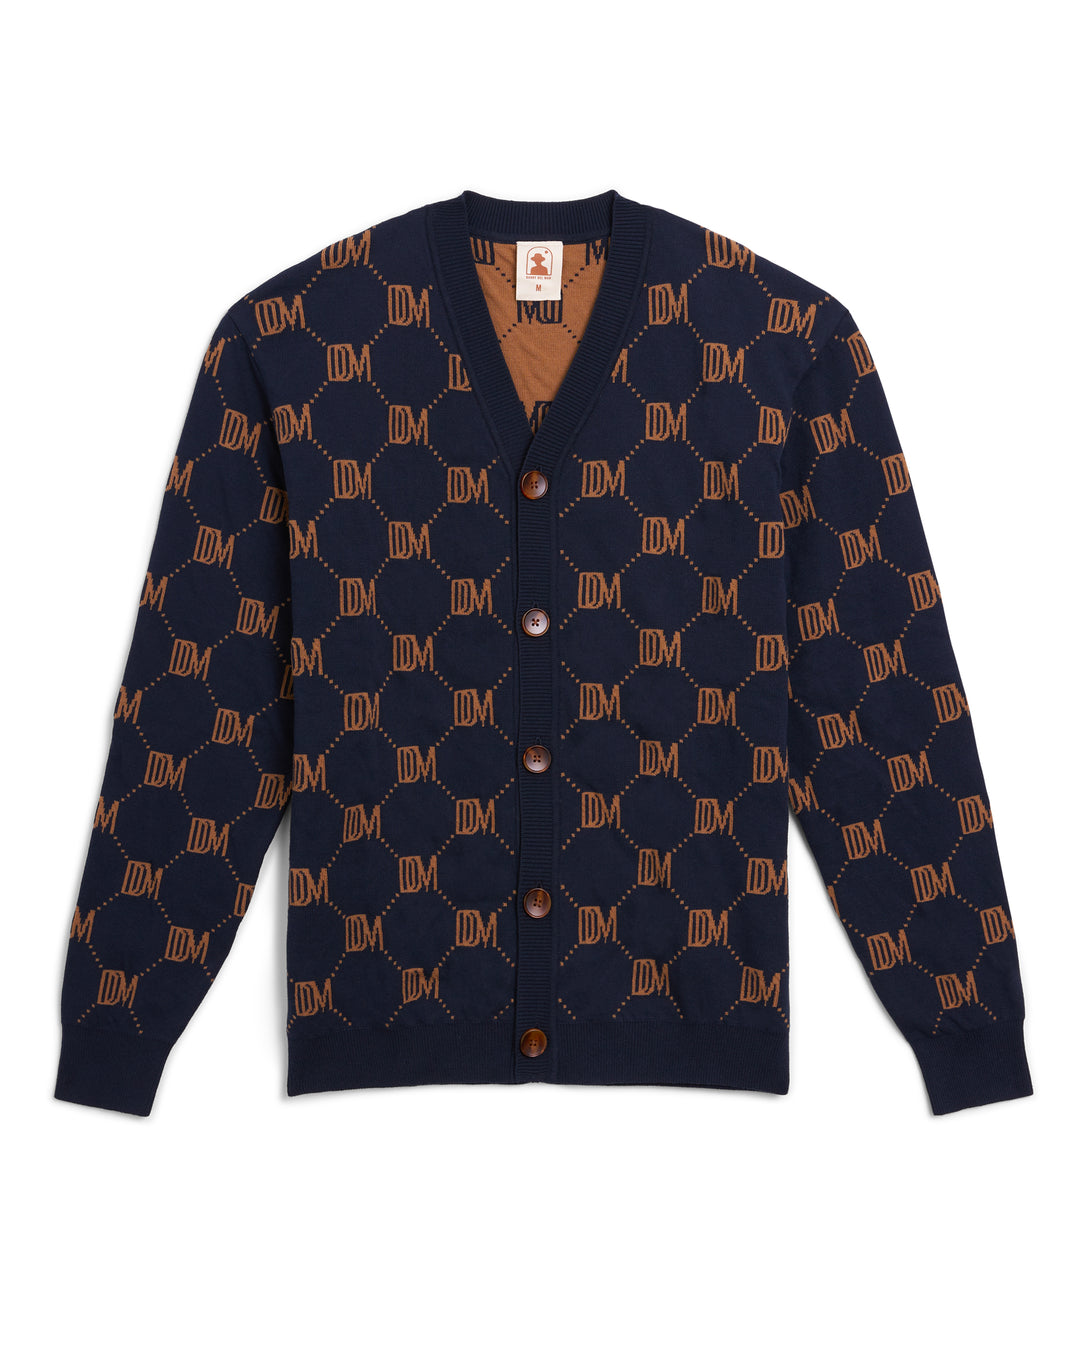 A navy and brown Castello Cardigan - Abyss by Dandy Del Mar with a monogram on it, perfect for the dandy aesthetic.